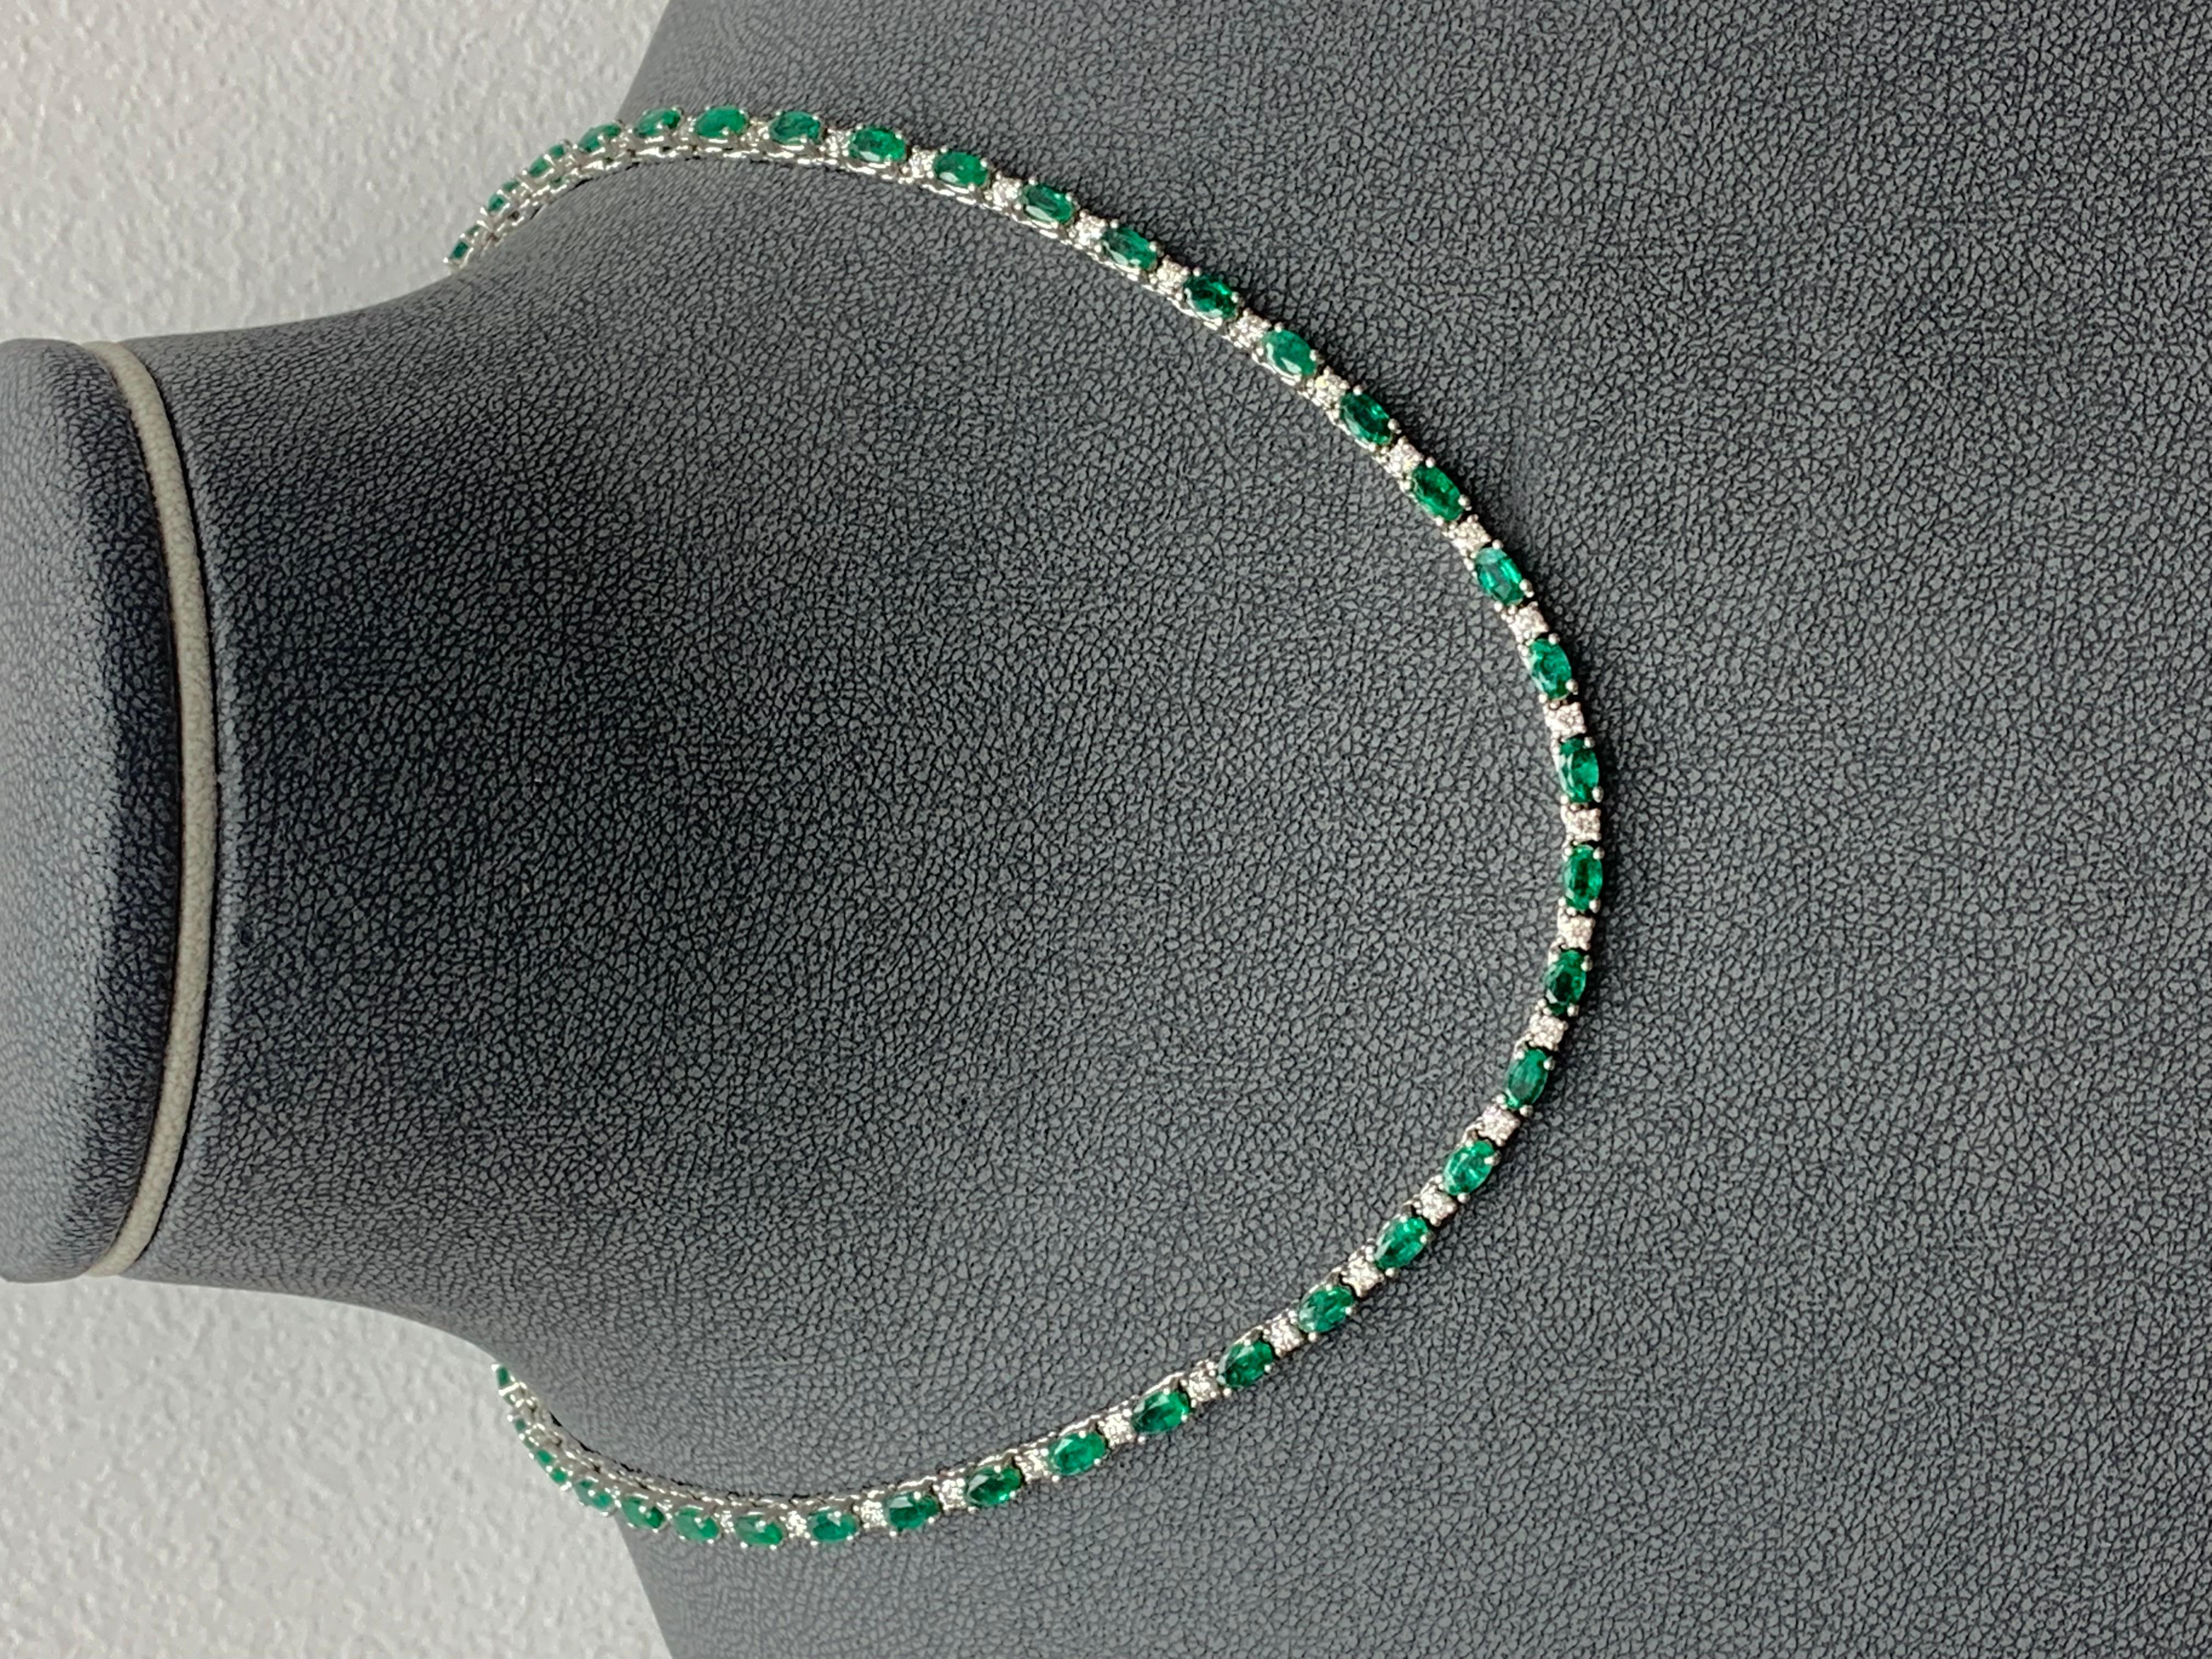 11.52 Carat Oval Cut Emerald and Diamond Tennis Necklace in 14K White Gold For Sale 2